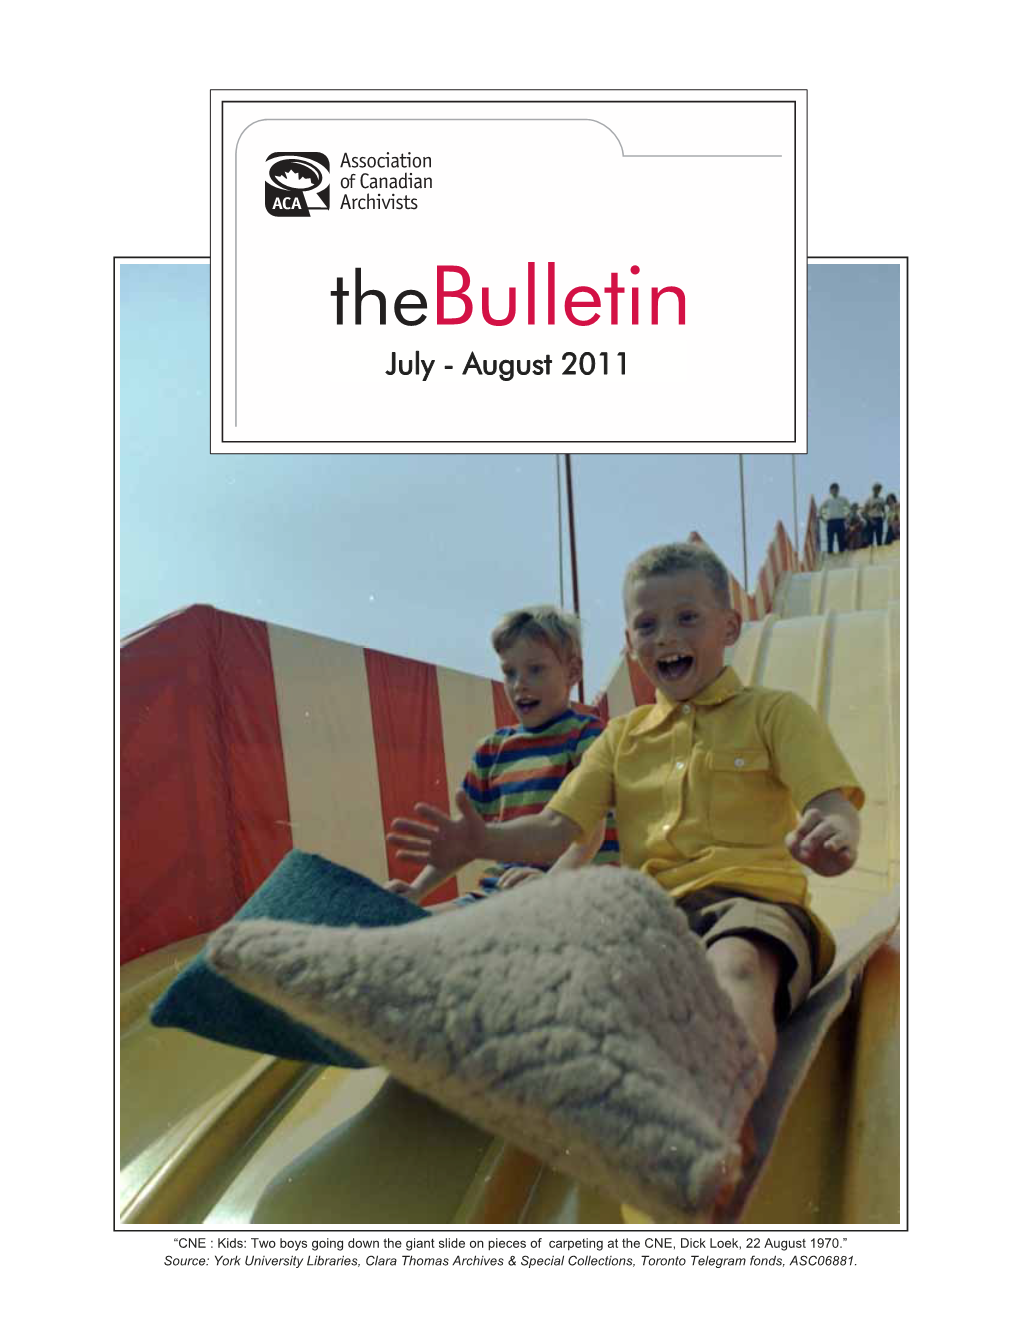 Thebulletin July June-July August 20112008 2011